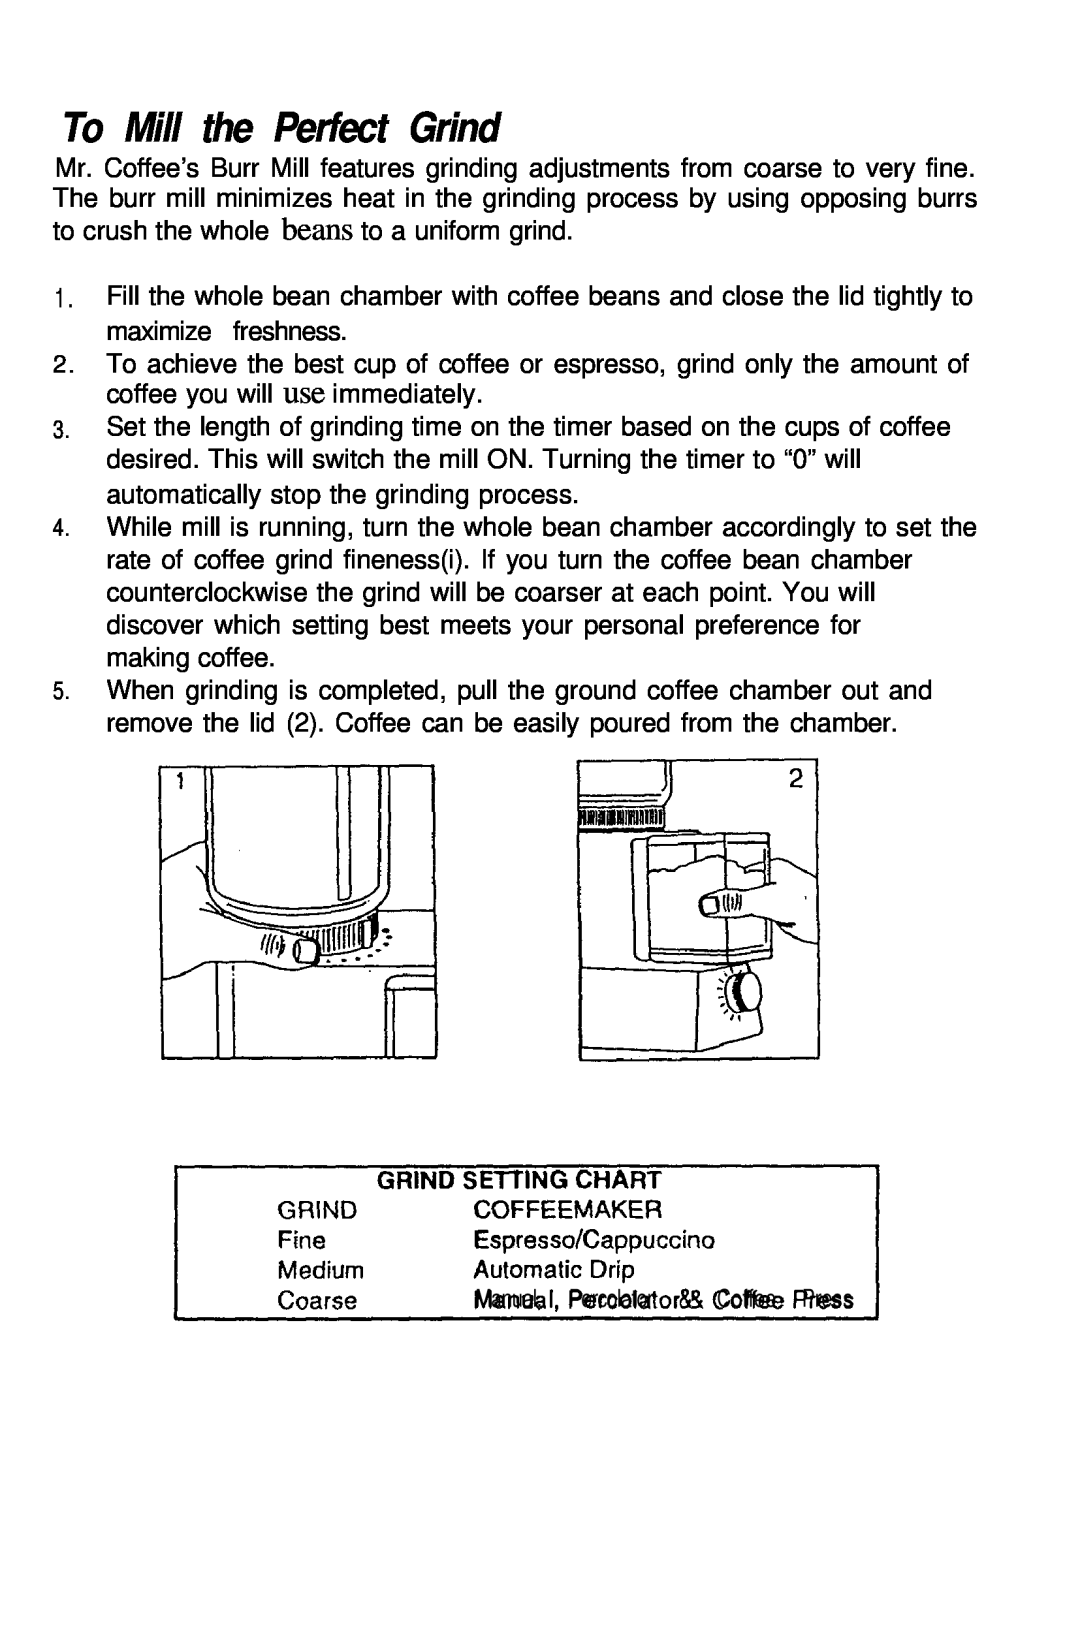 Mr. Coffee BMLD manual To Mill the Perfect Grind 